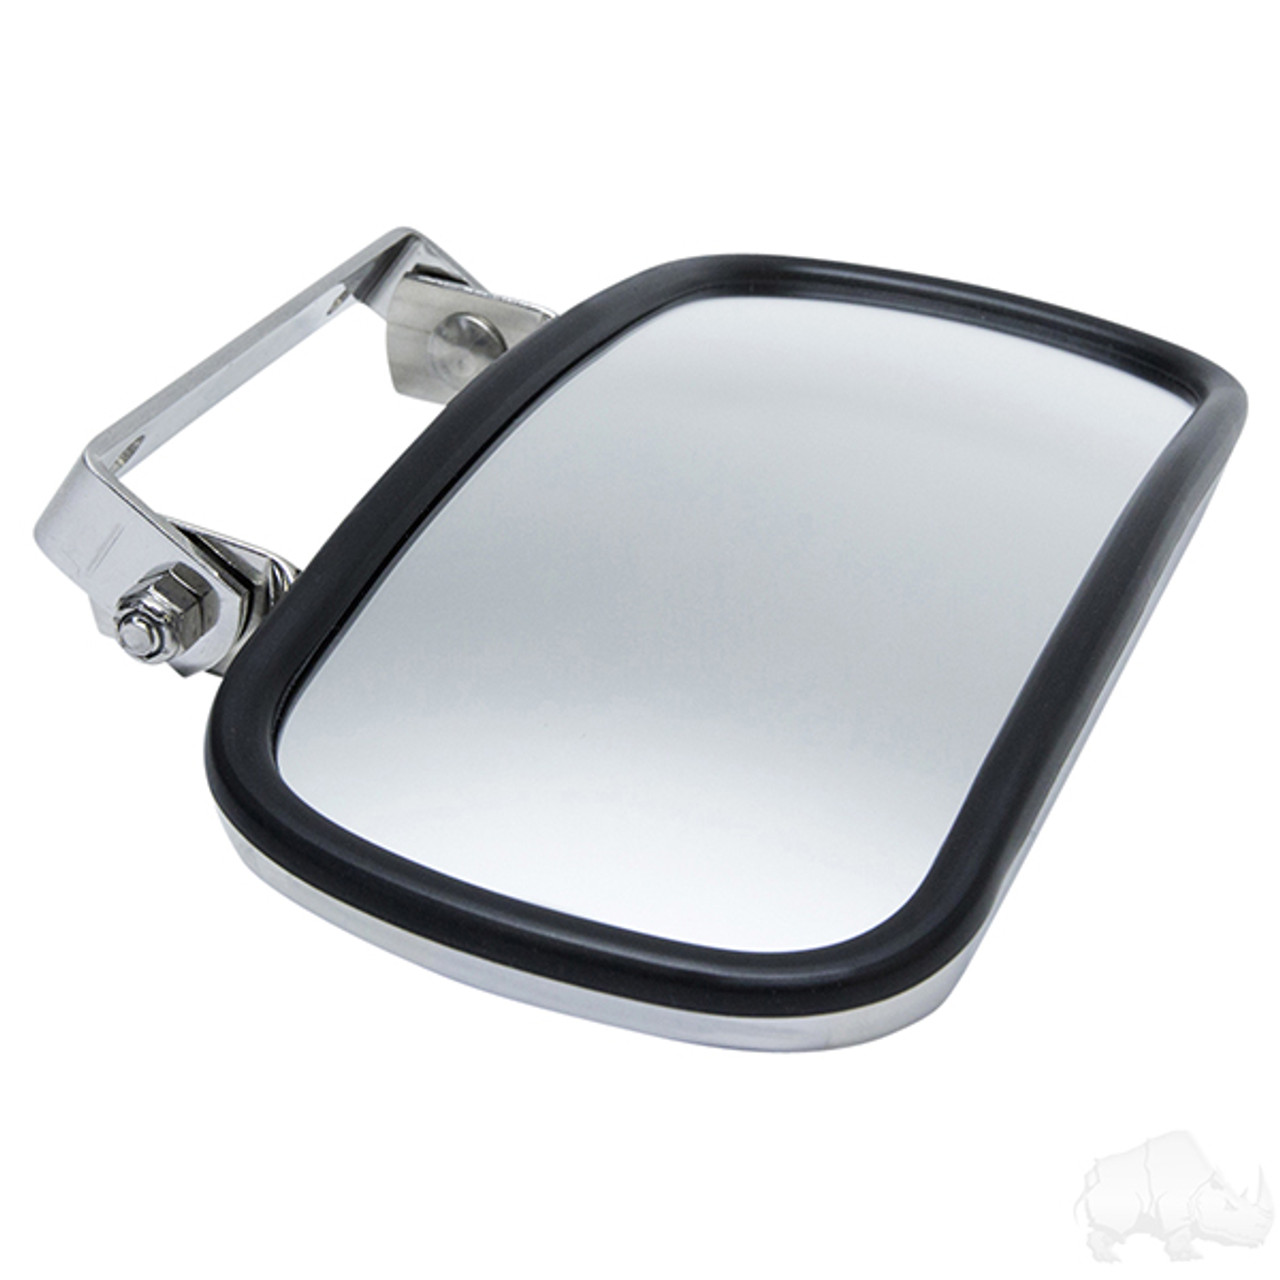 Universal 180 Degree Convex Roof Mount Mirror, Stainless Steel, ACC-1024, 03-035